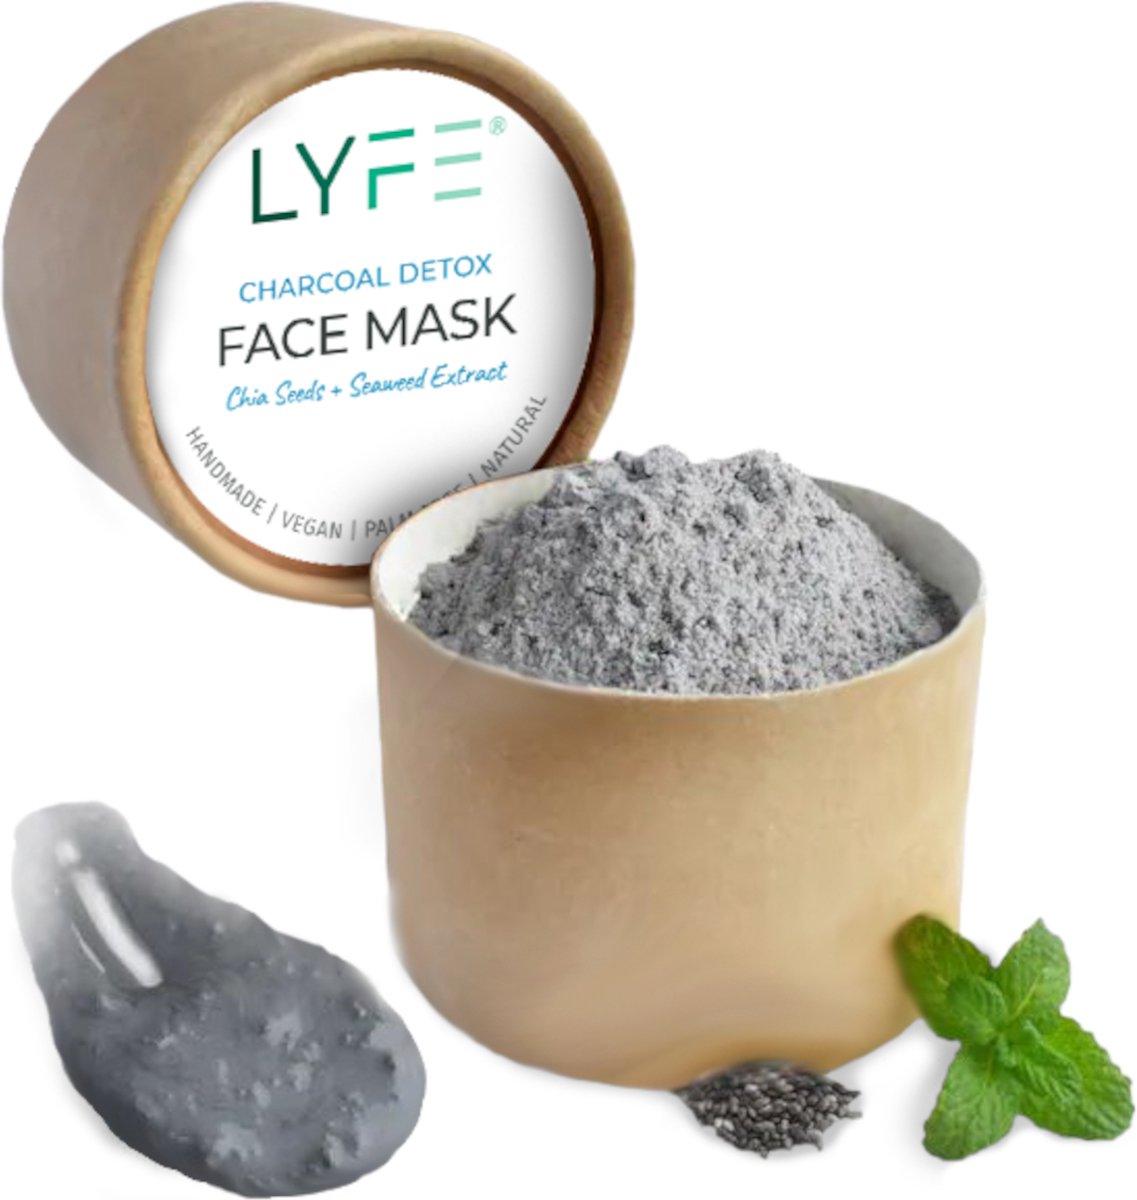 LYFE Detox Black Charcoal Face Mask Best known for its ability to draw out toxins and remove impurities from the skin. It helps reduce acne, unclogs pores, improves skin health and balances oily skin.